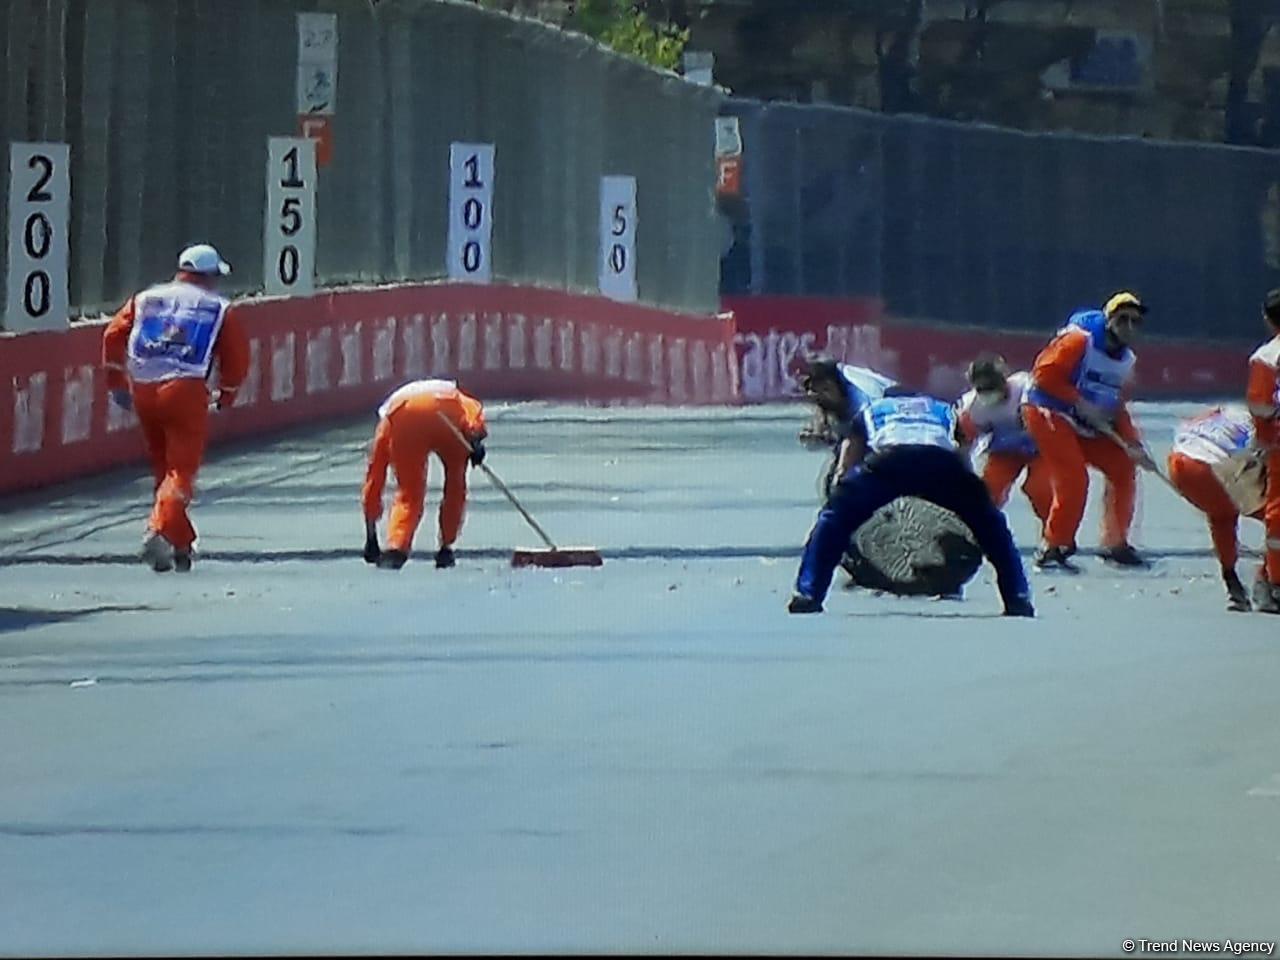 Accident during F2 qualifying rounds in Baku